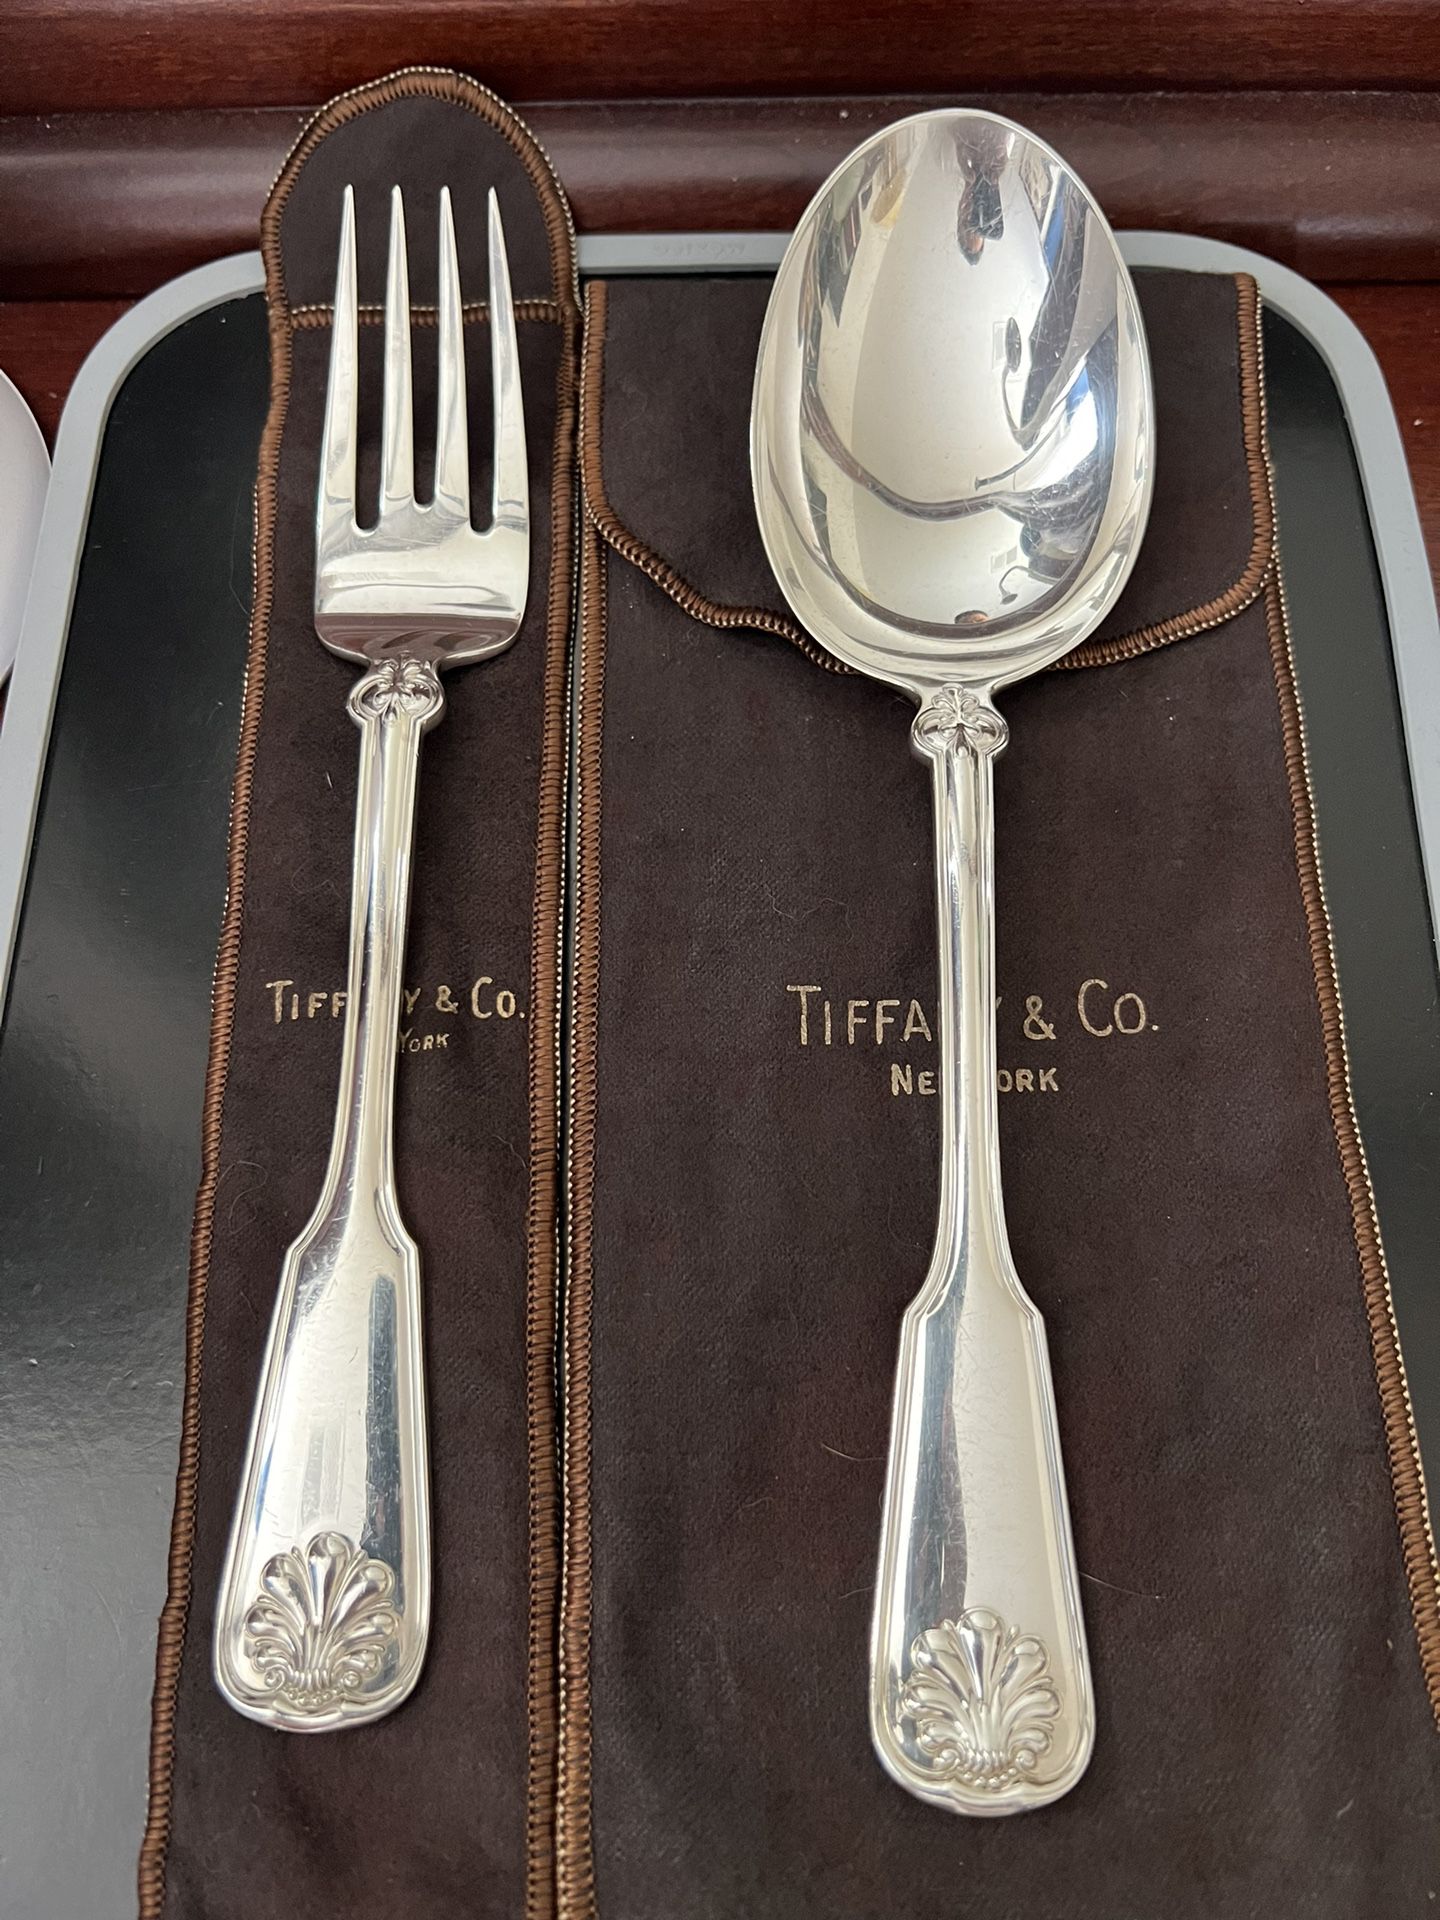 TWO VINTAGE AUTHENTIC TIFFANY & CO -STERLING SILVER BIG SIZE SPOONS AND FORK 217 GRAMS OF STERLING SILVER 